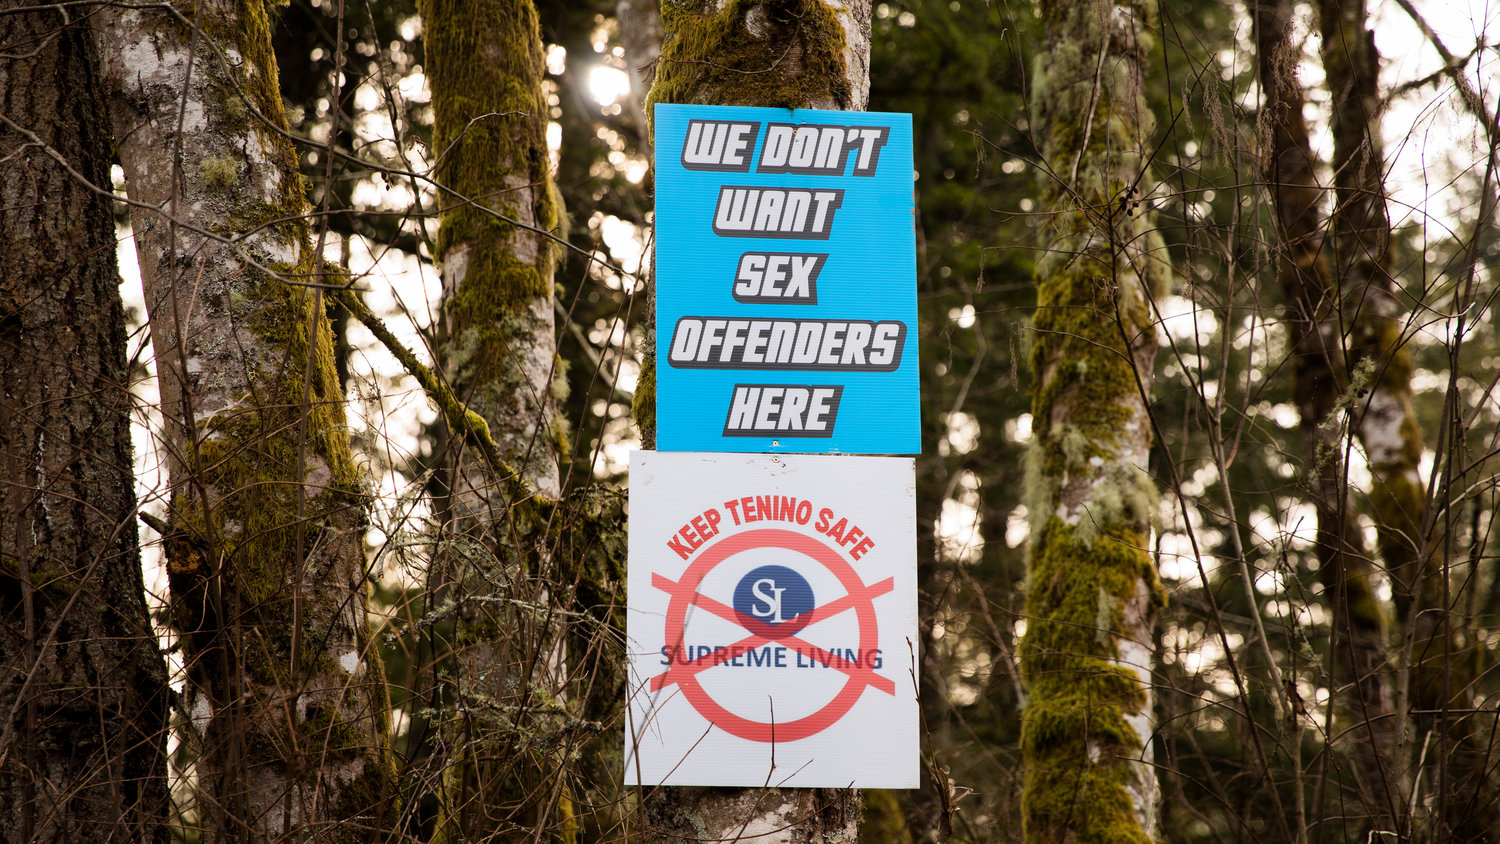 Signs are hung on trees surrounding the Supreme Living facility located at 2813 140th Ave. SW in Tenino on Wednesday.